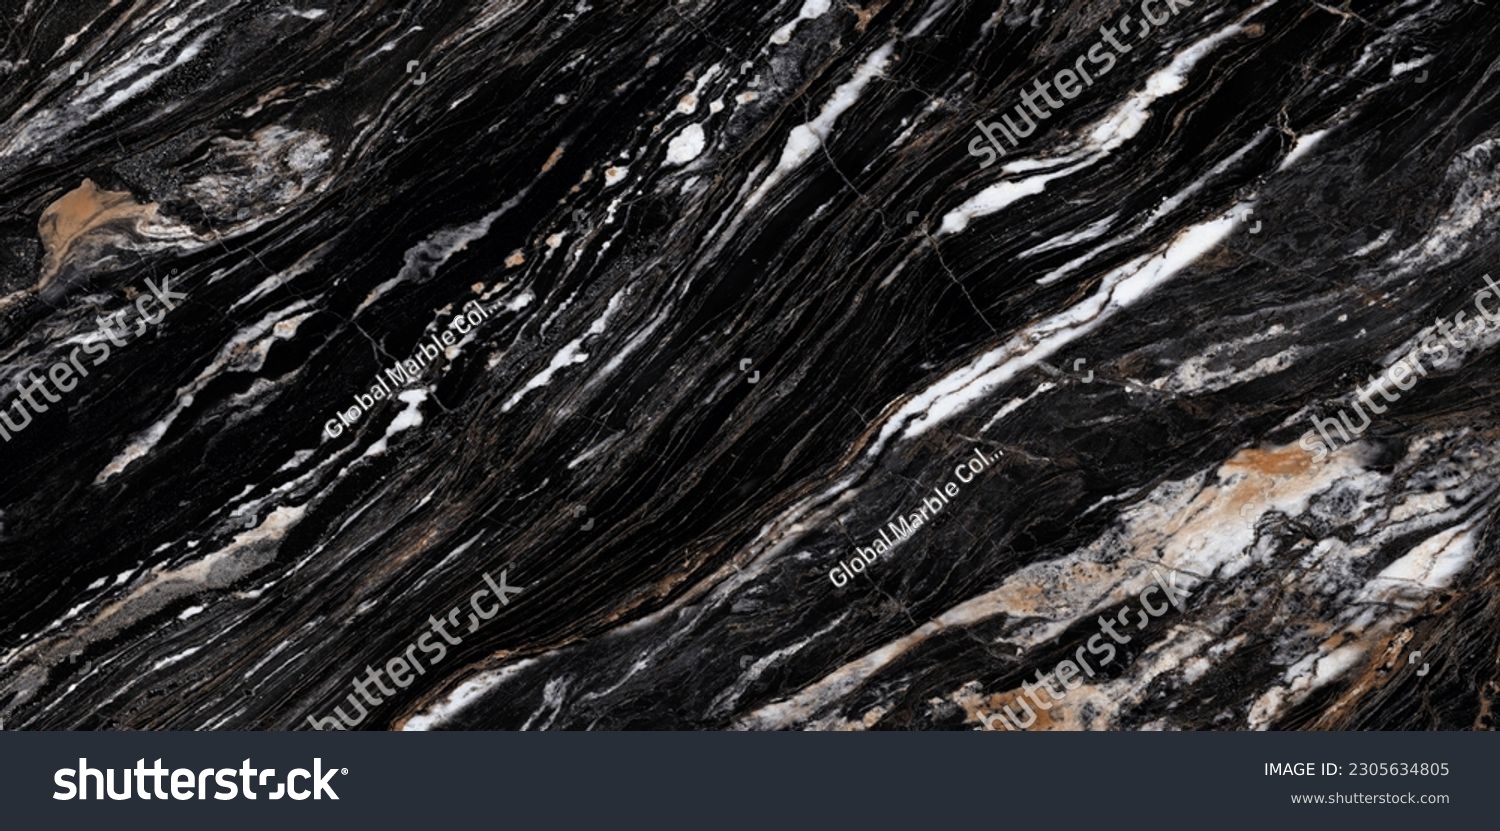 Black Marble Texture, Golden Veins, High Gloss Marble For Abstract Interior Home Decoration And Ceramic Wall Tiles And Floor Tiles Surface.  #2305634805